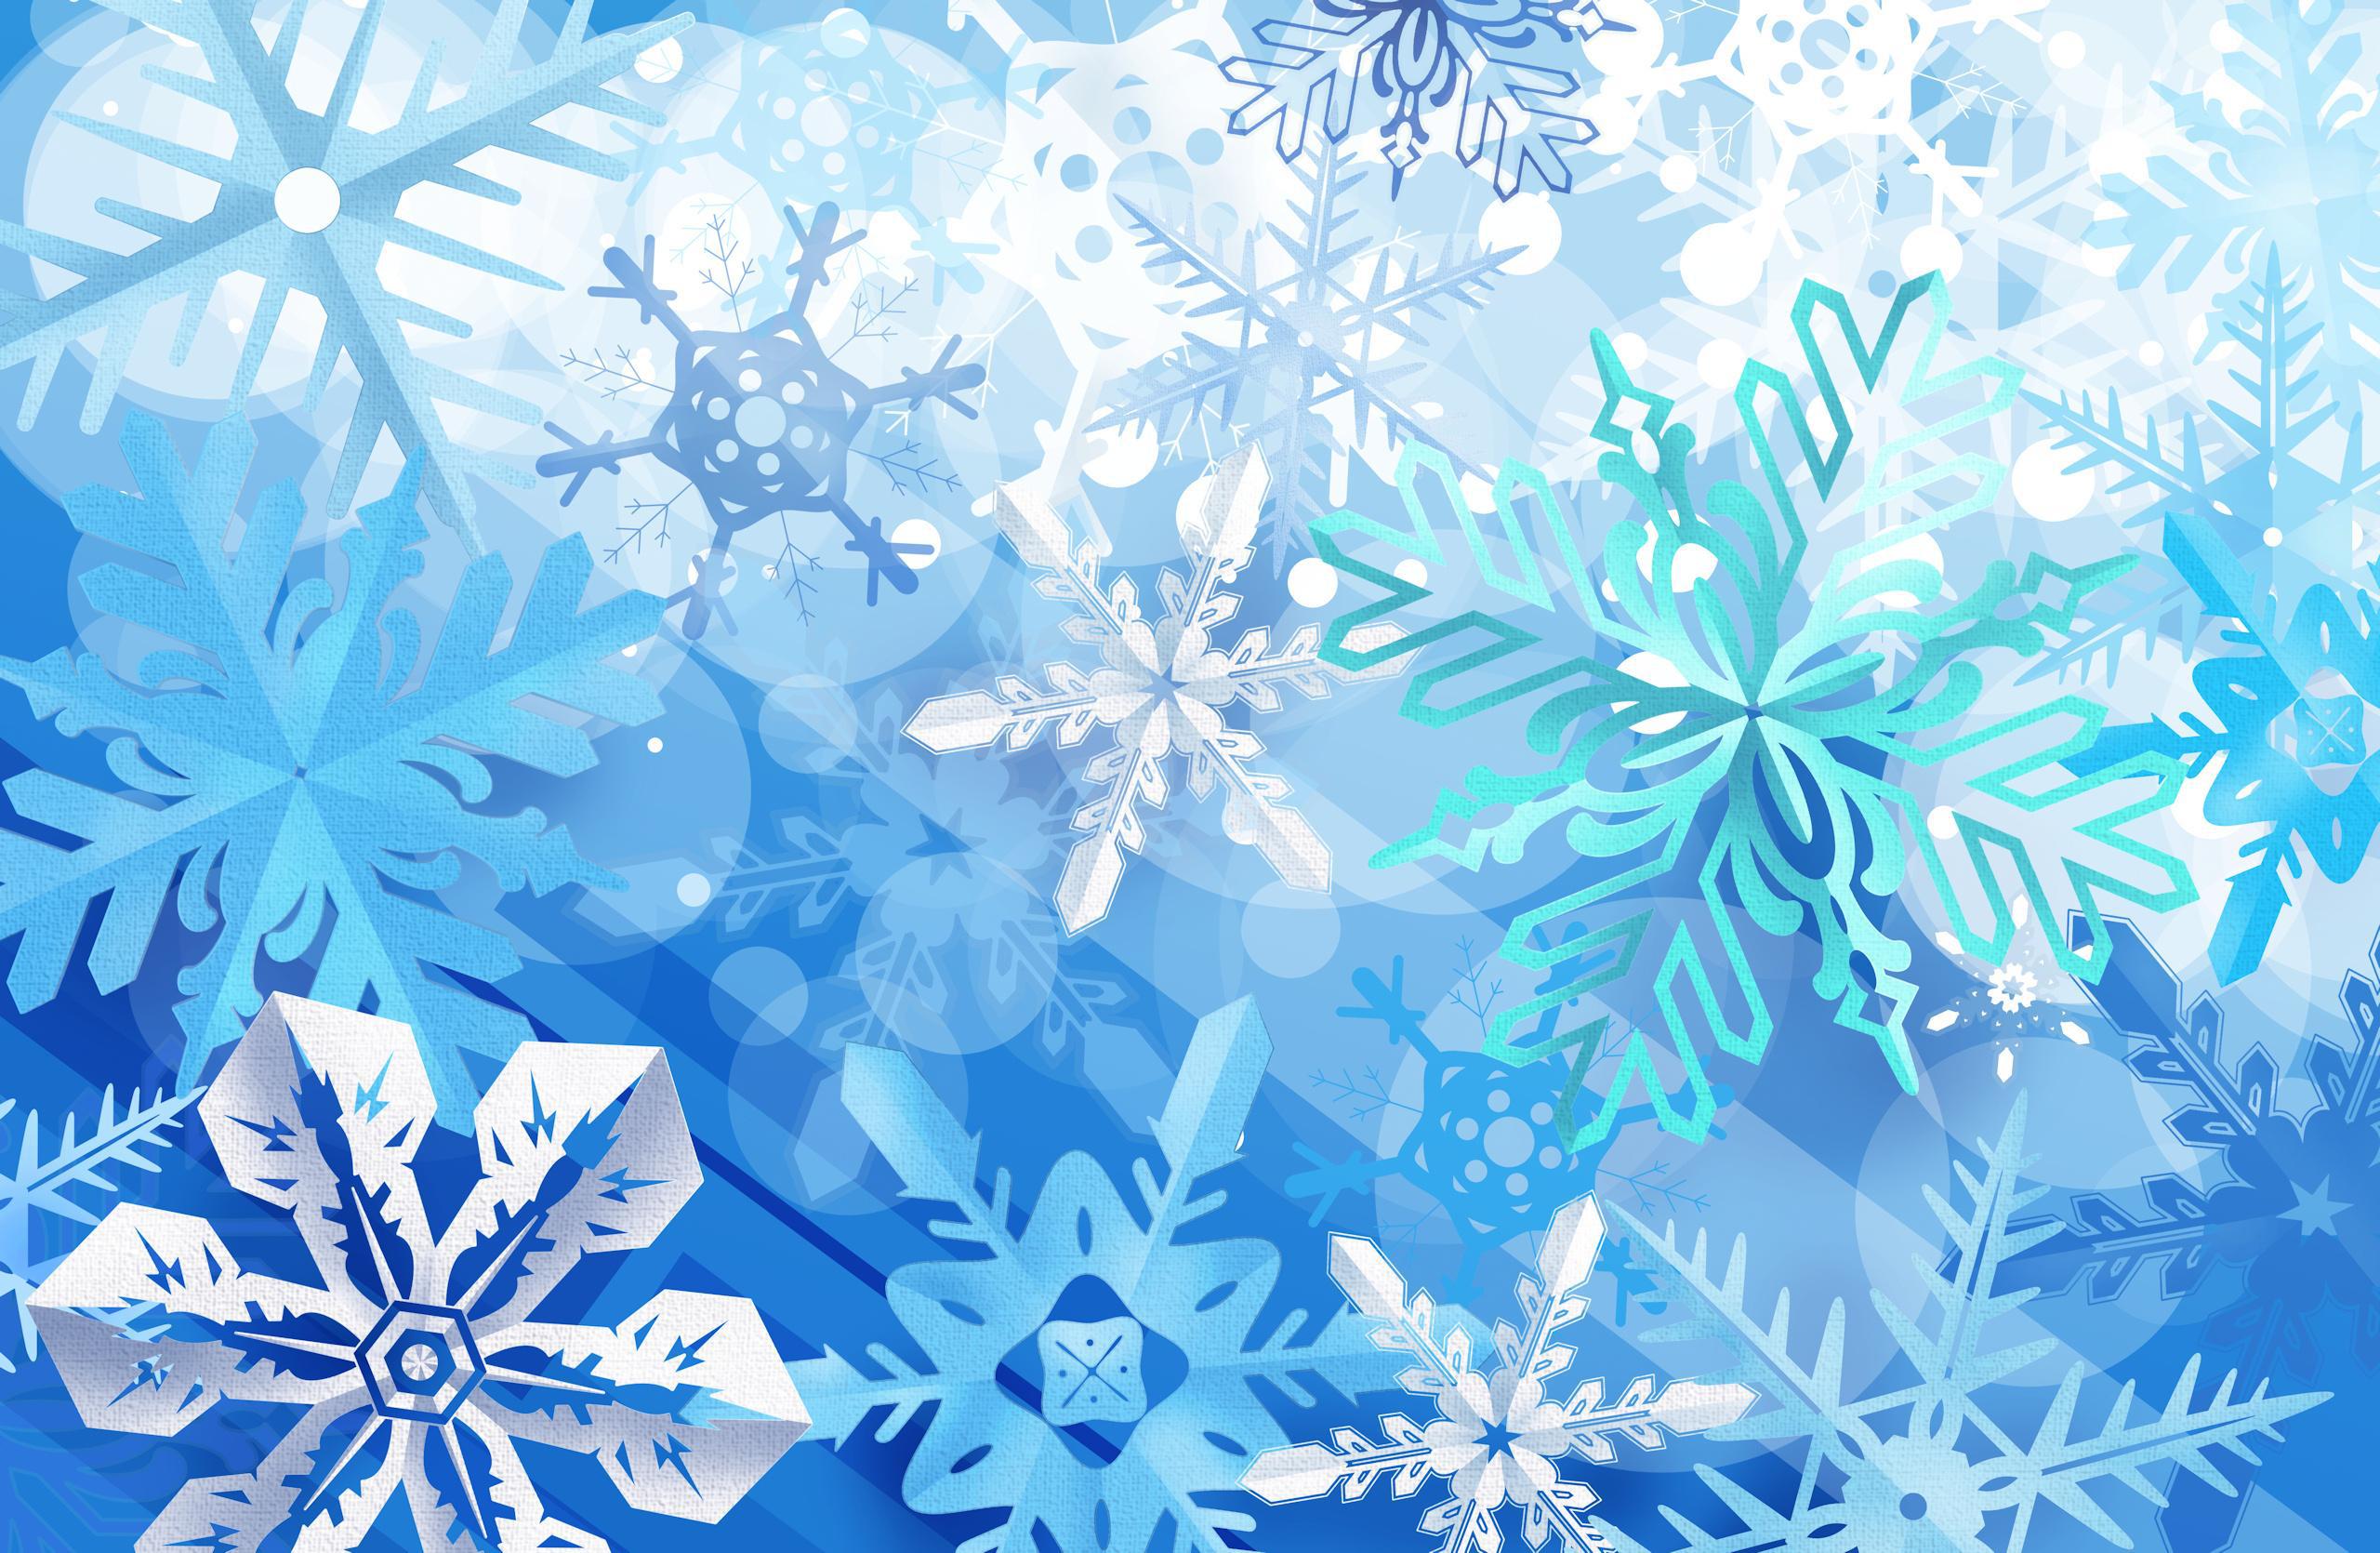 Snowflakes In Blue - HD Wallpaper 